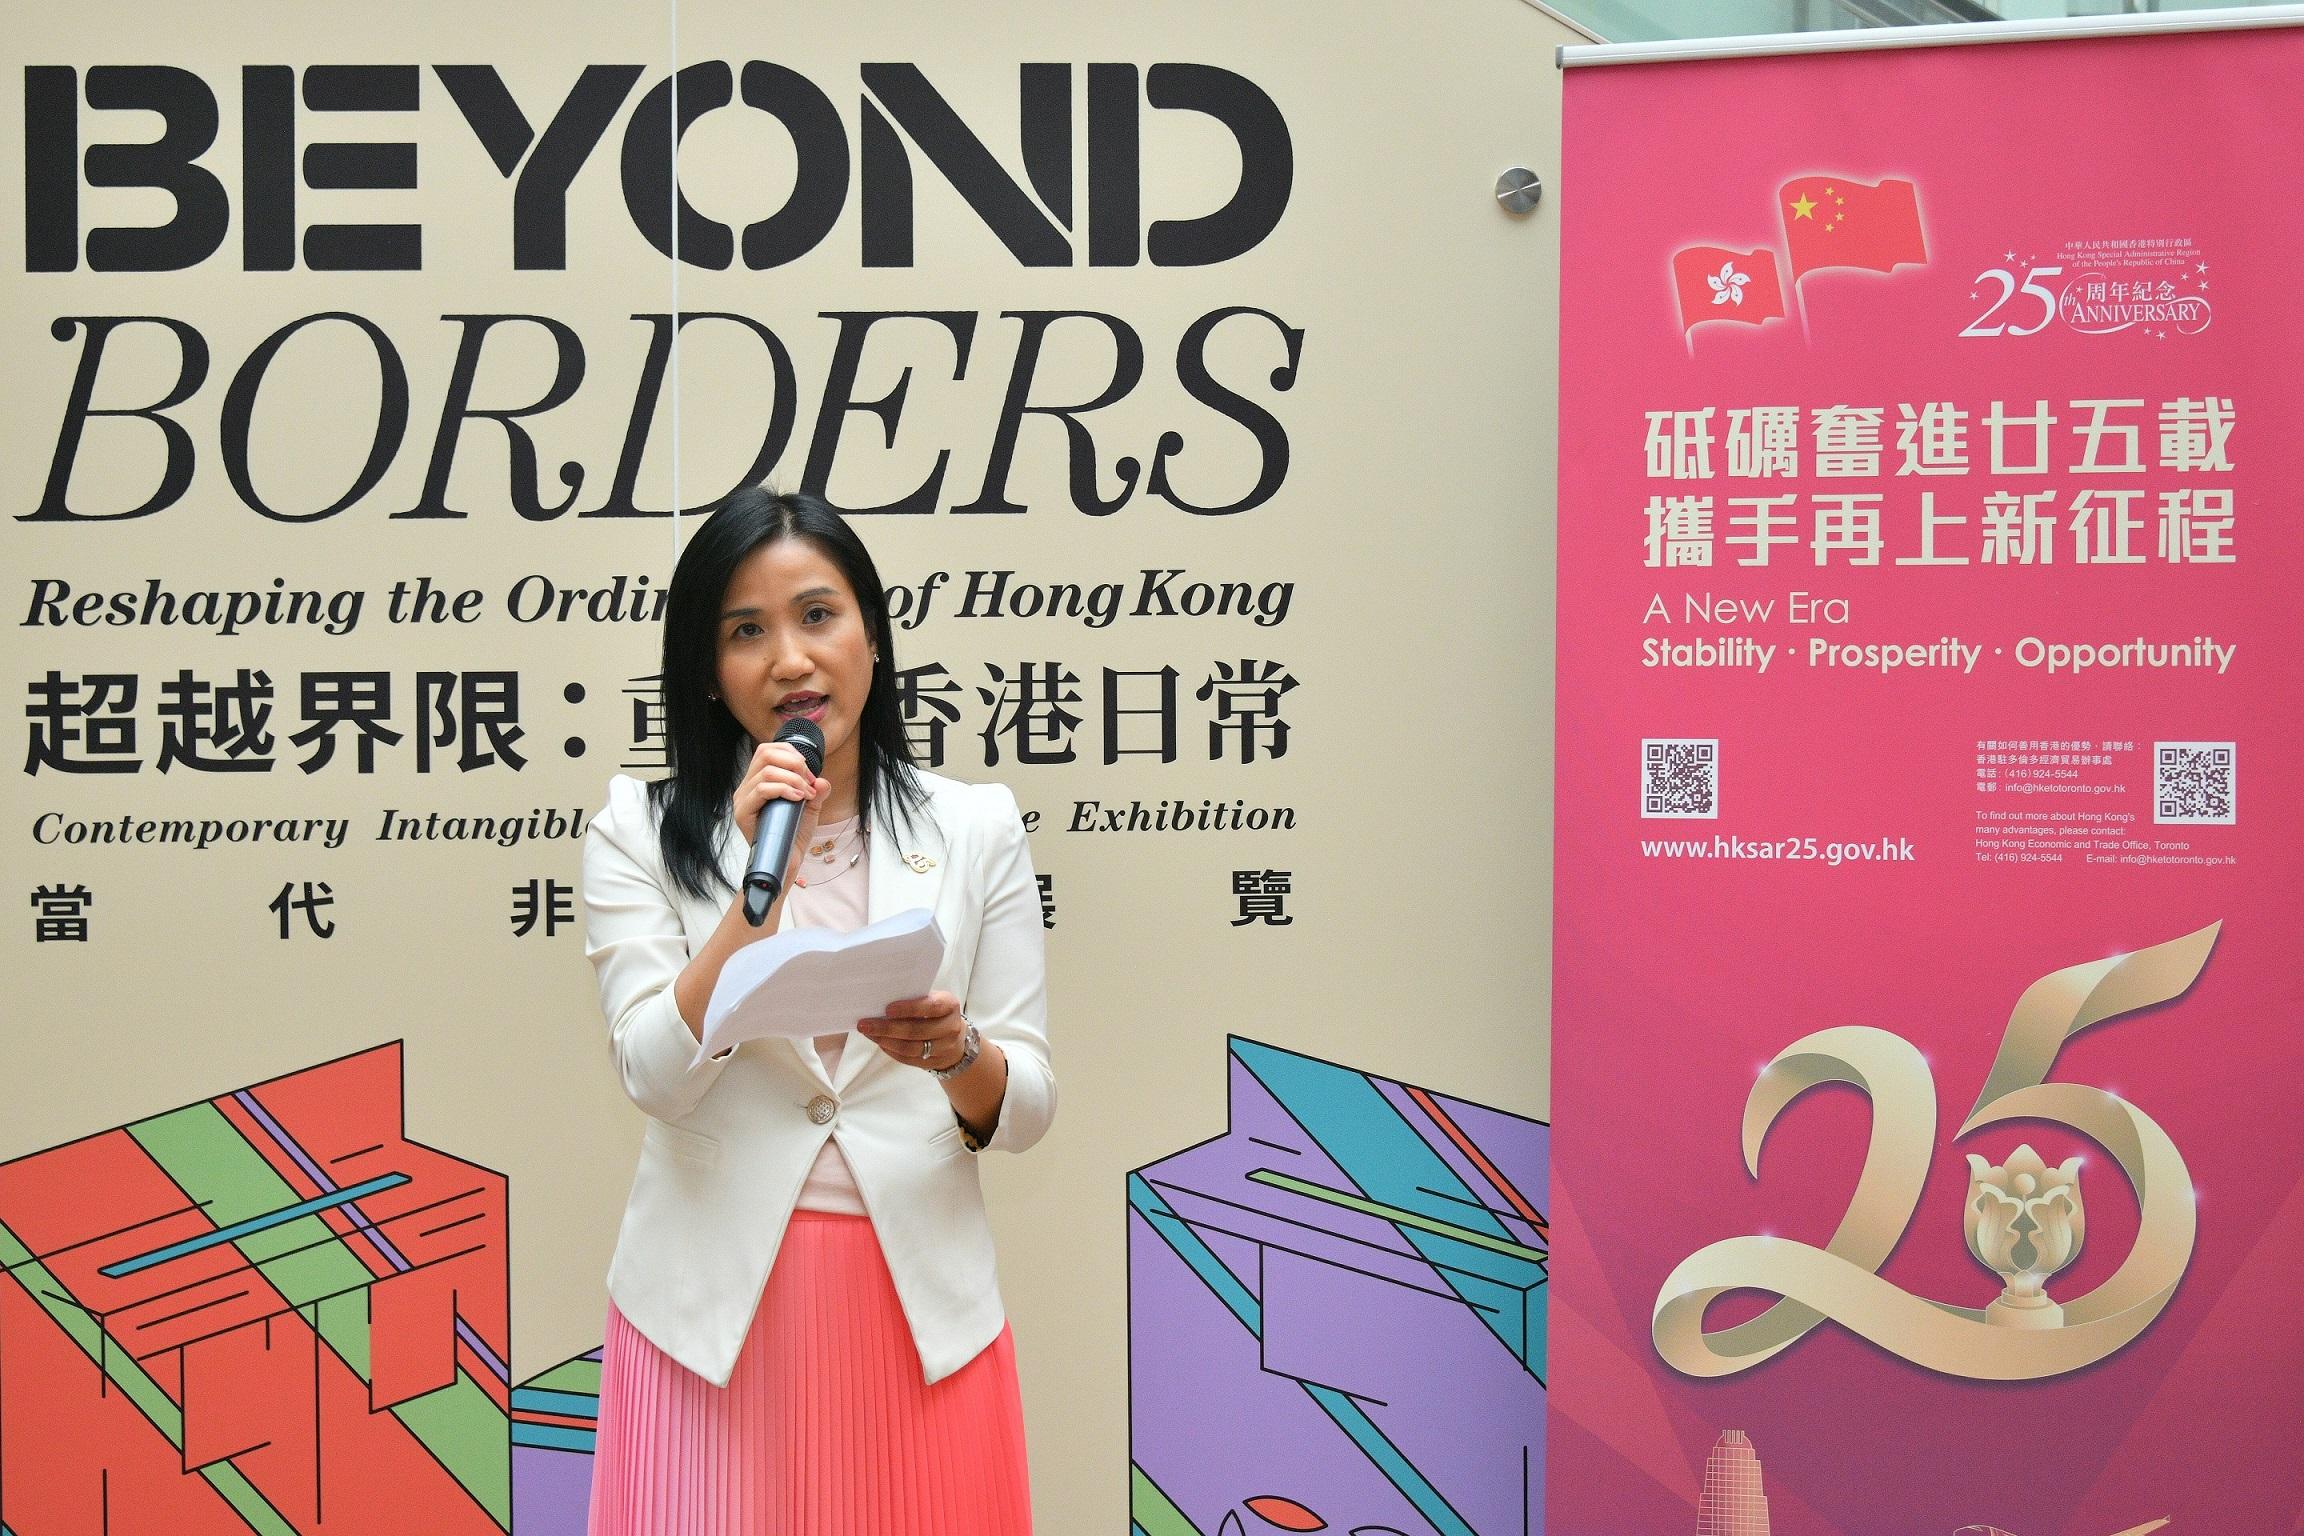 The Director of the Hong Kong Economic and Trade Office (Toronto), Ms Emily Mo, speaks at the opening ceremony of the "Beyond Borders: Reshaping the Ordinaries of Hong Kong" art exhibition in Toronto yesterday (June 1, Toronto time).